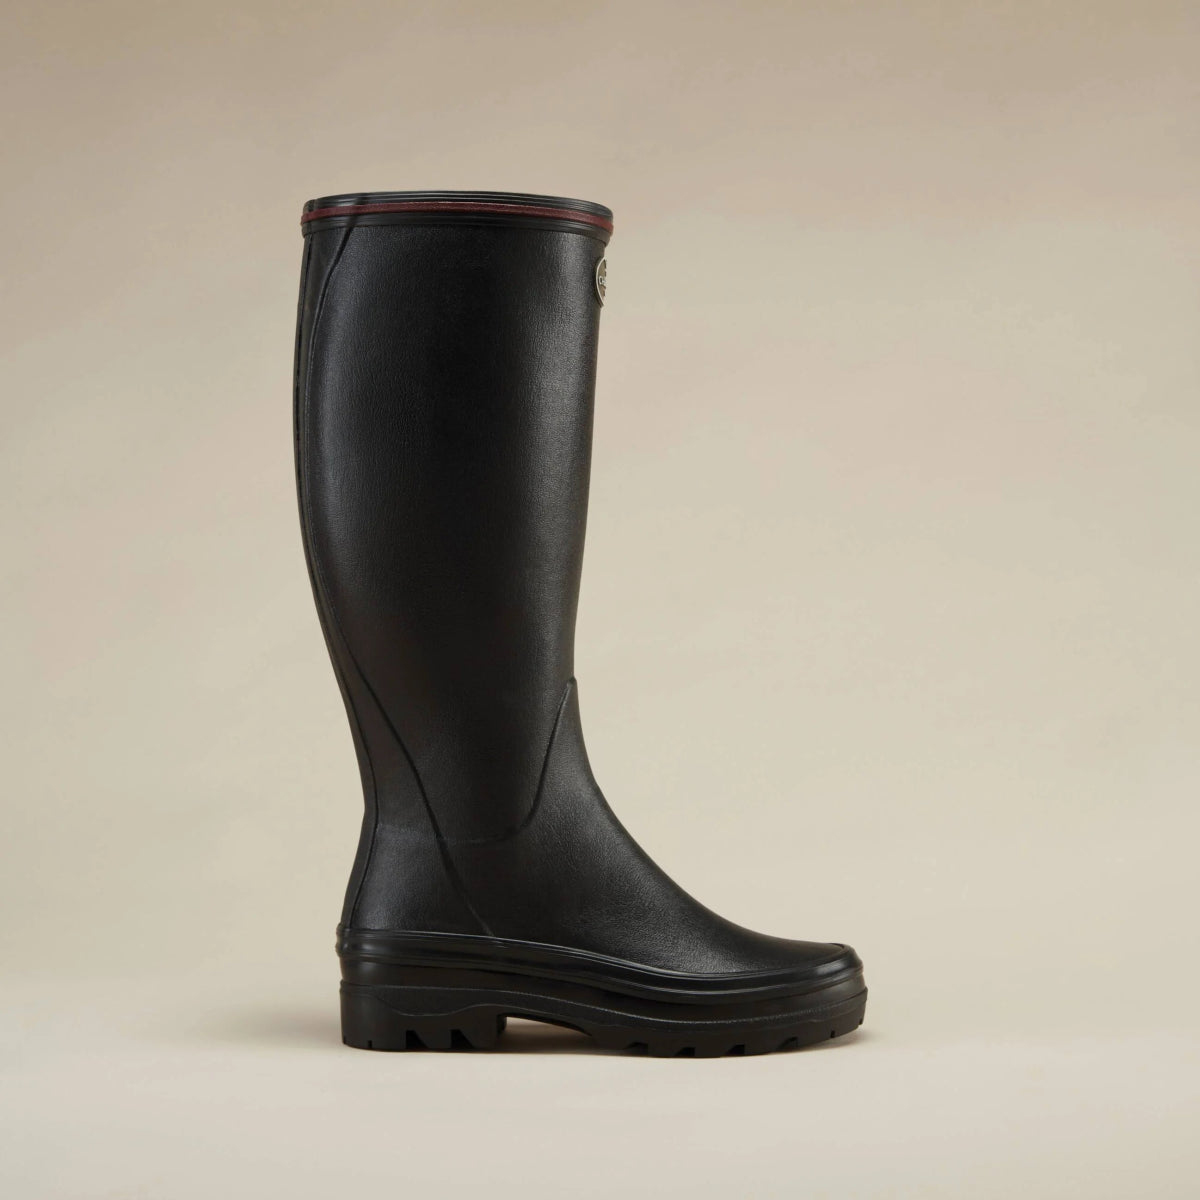 Le Chameau Giverny Jersey Lined Boot - UK 4 -